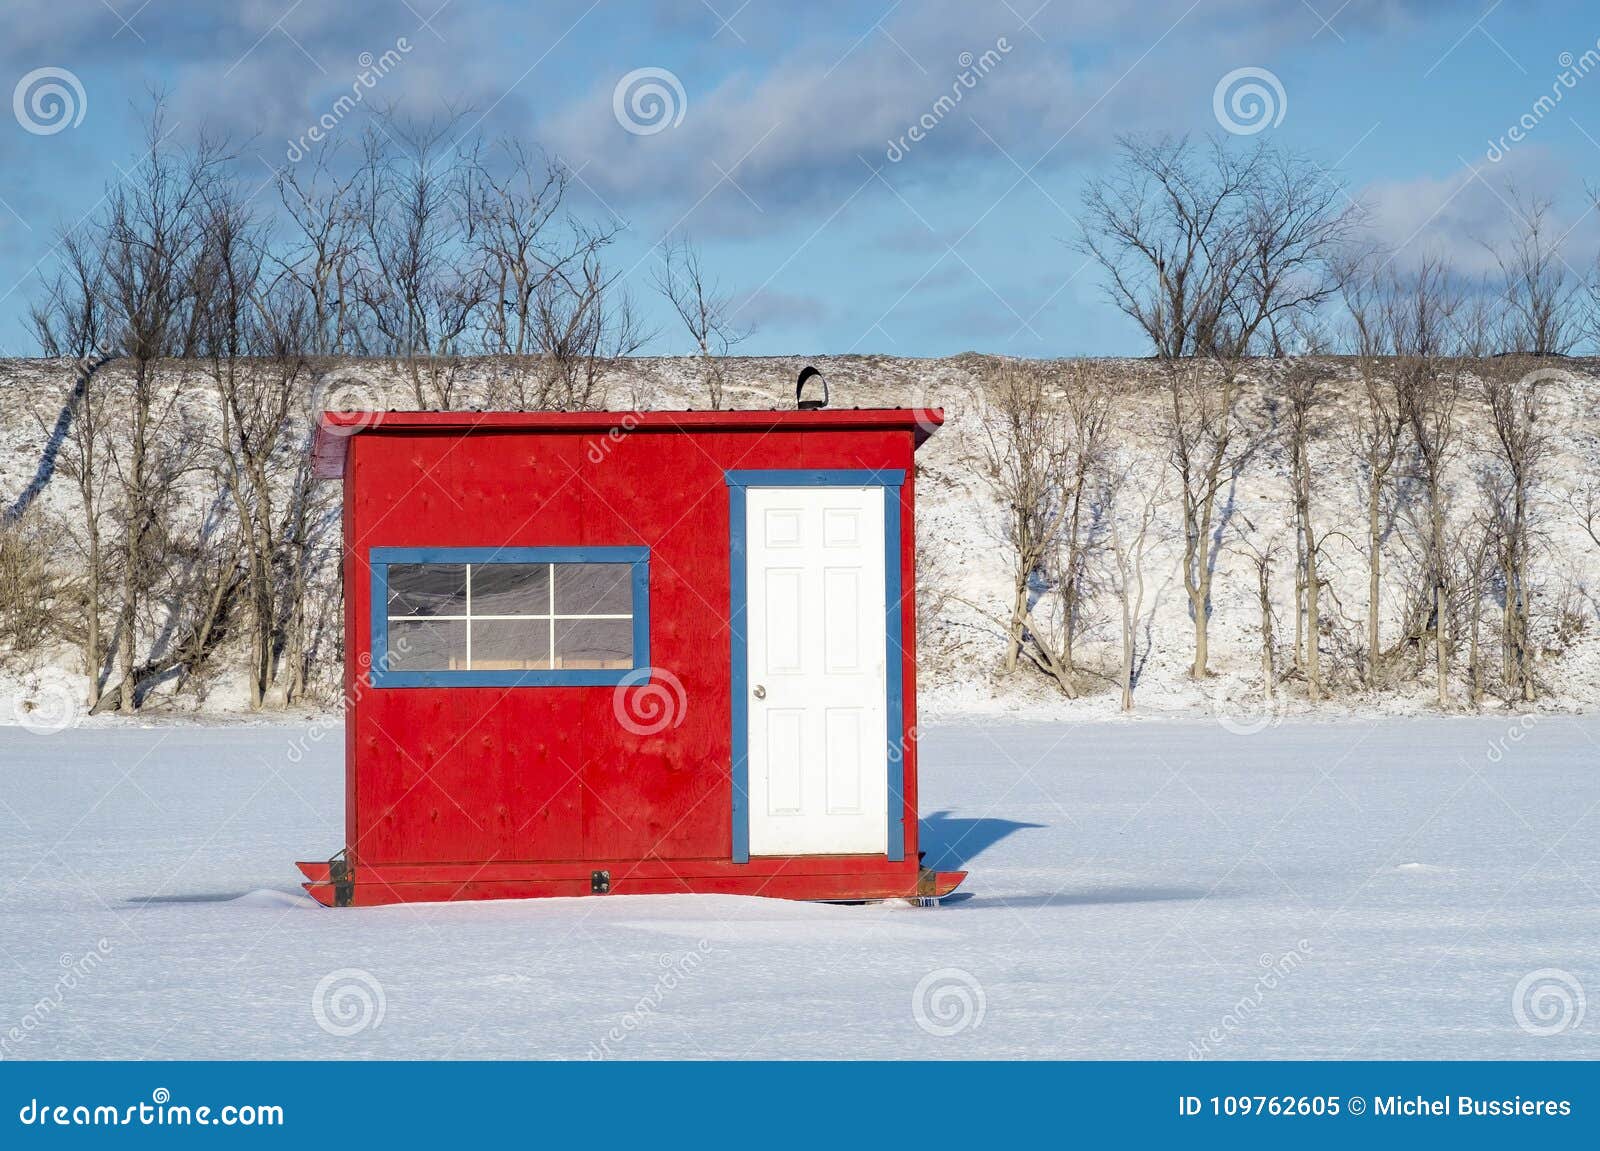 White Blue Red Ice Fishing Cabin Stock Image - Image of crossing